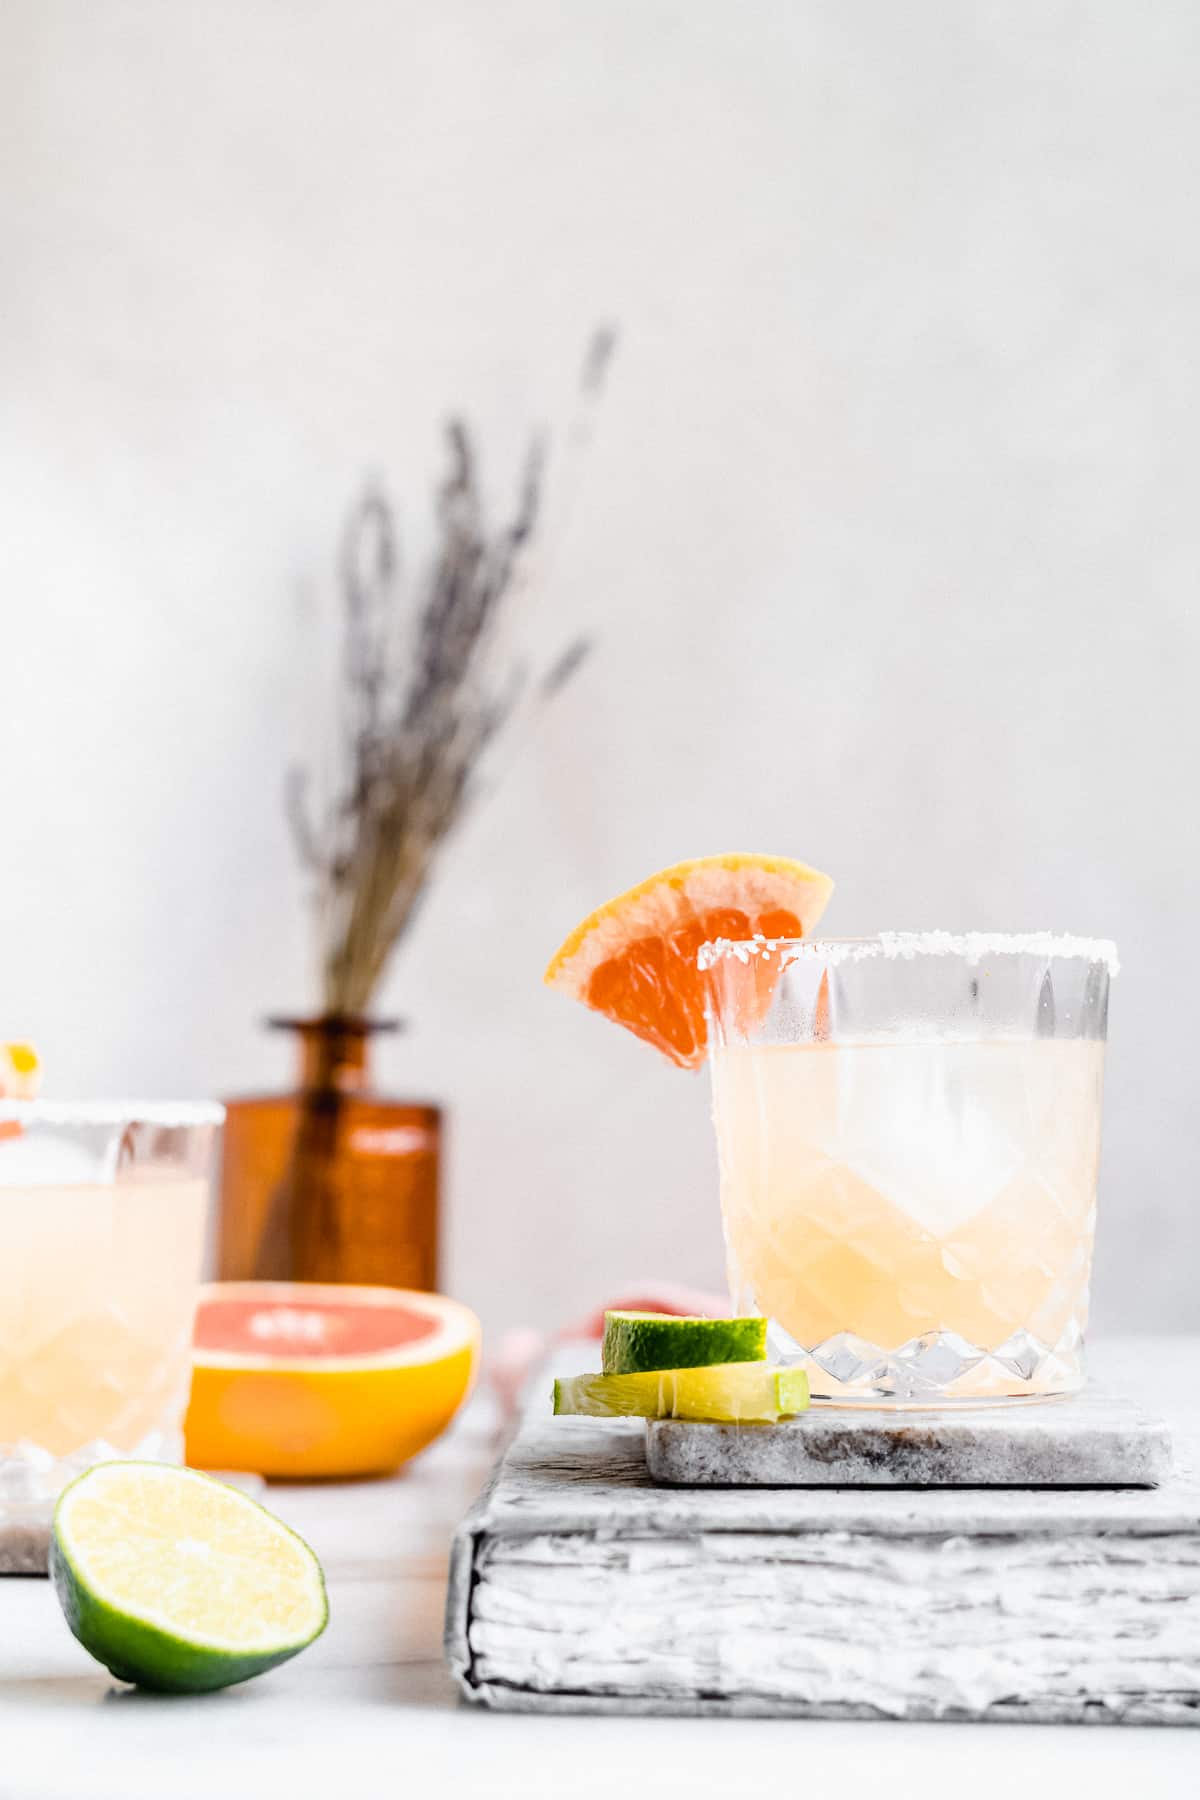 Side view photo of the Skinny Smoky Grapefruit Margarita served in a crystal glass that is sitting on a coaster on top of a book.  Half a grapefruit and a slice of lime are seen in the background.  